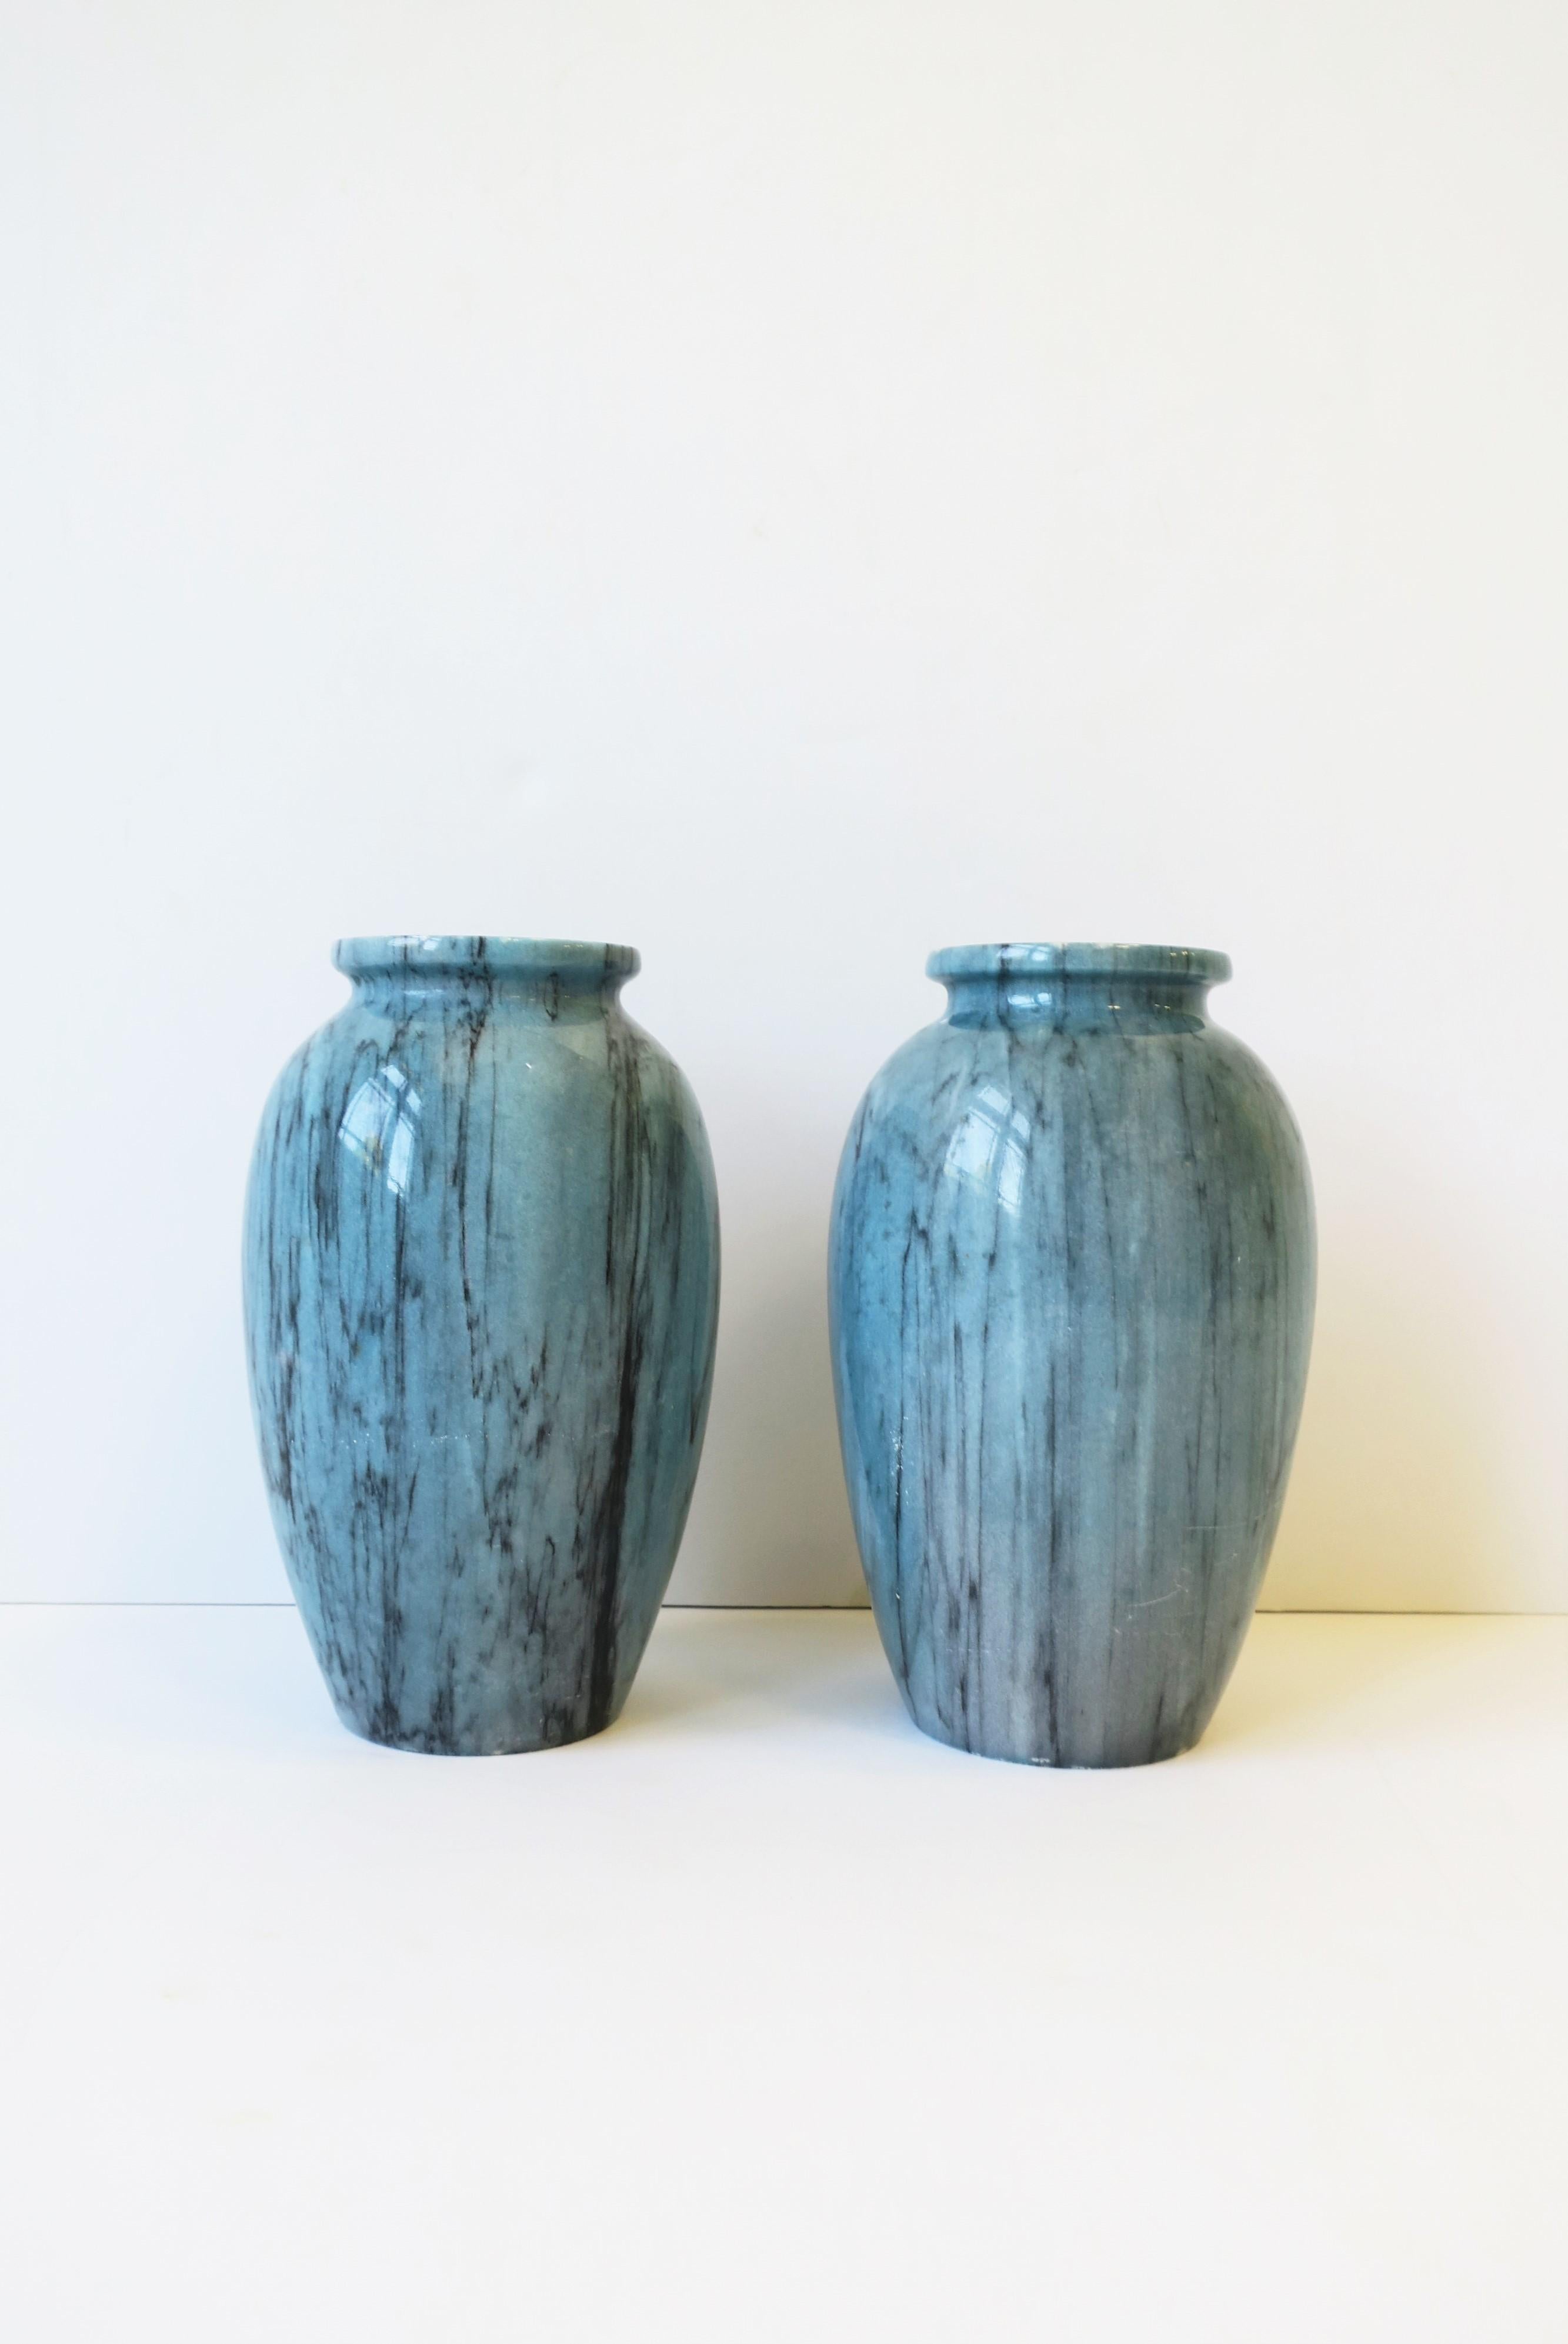 Italian Blue Marble Urns Vases, Pair In Good Condition For Sale In New York, NY